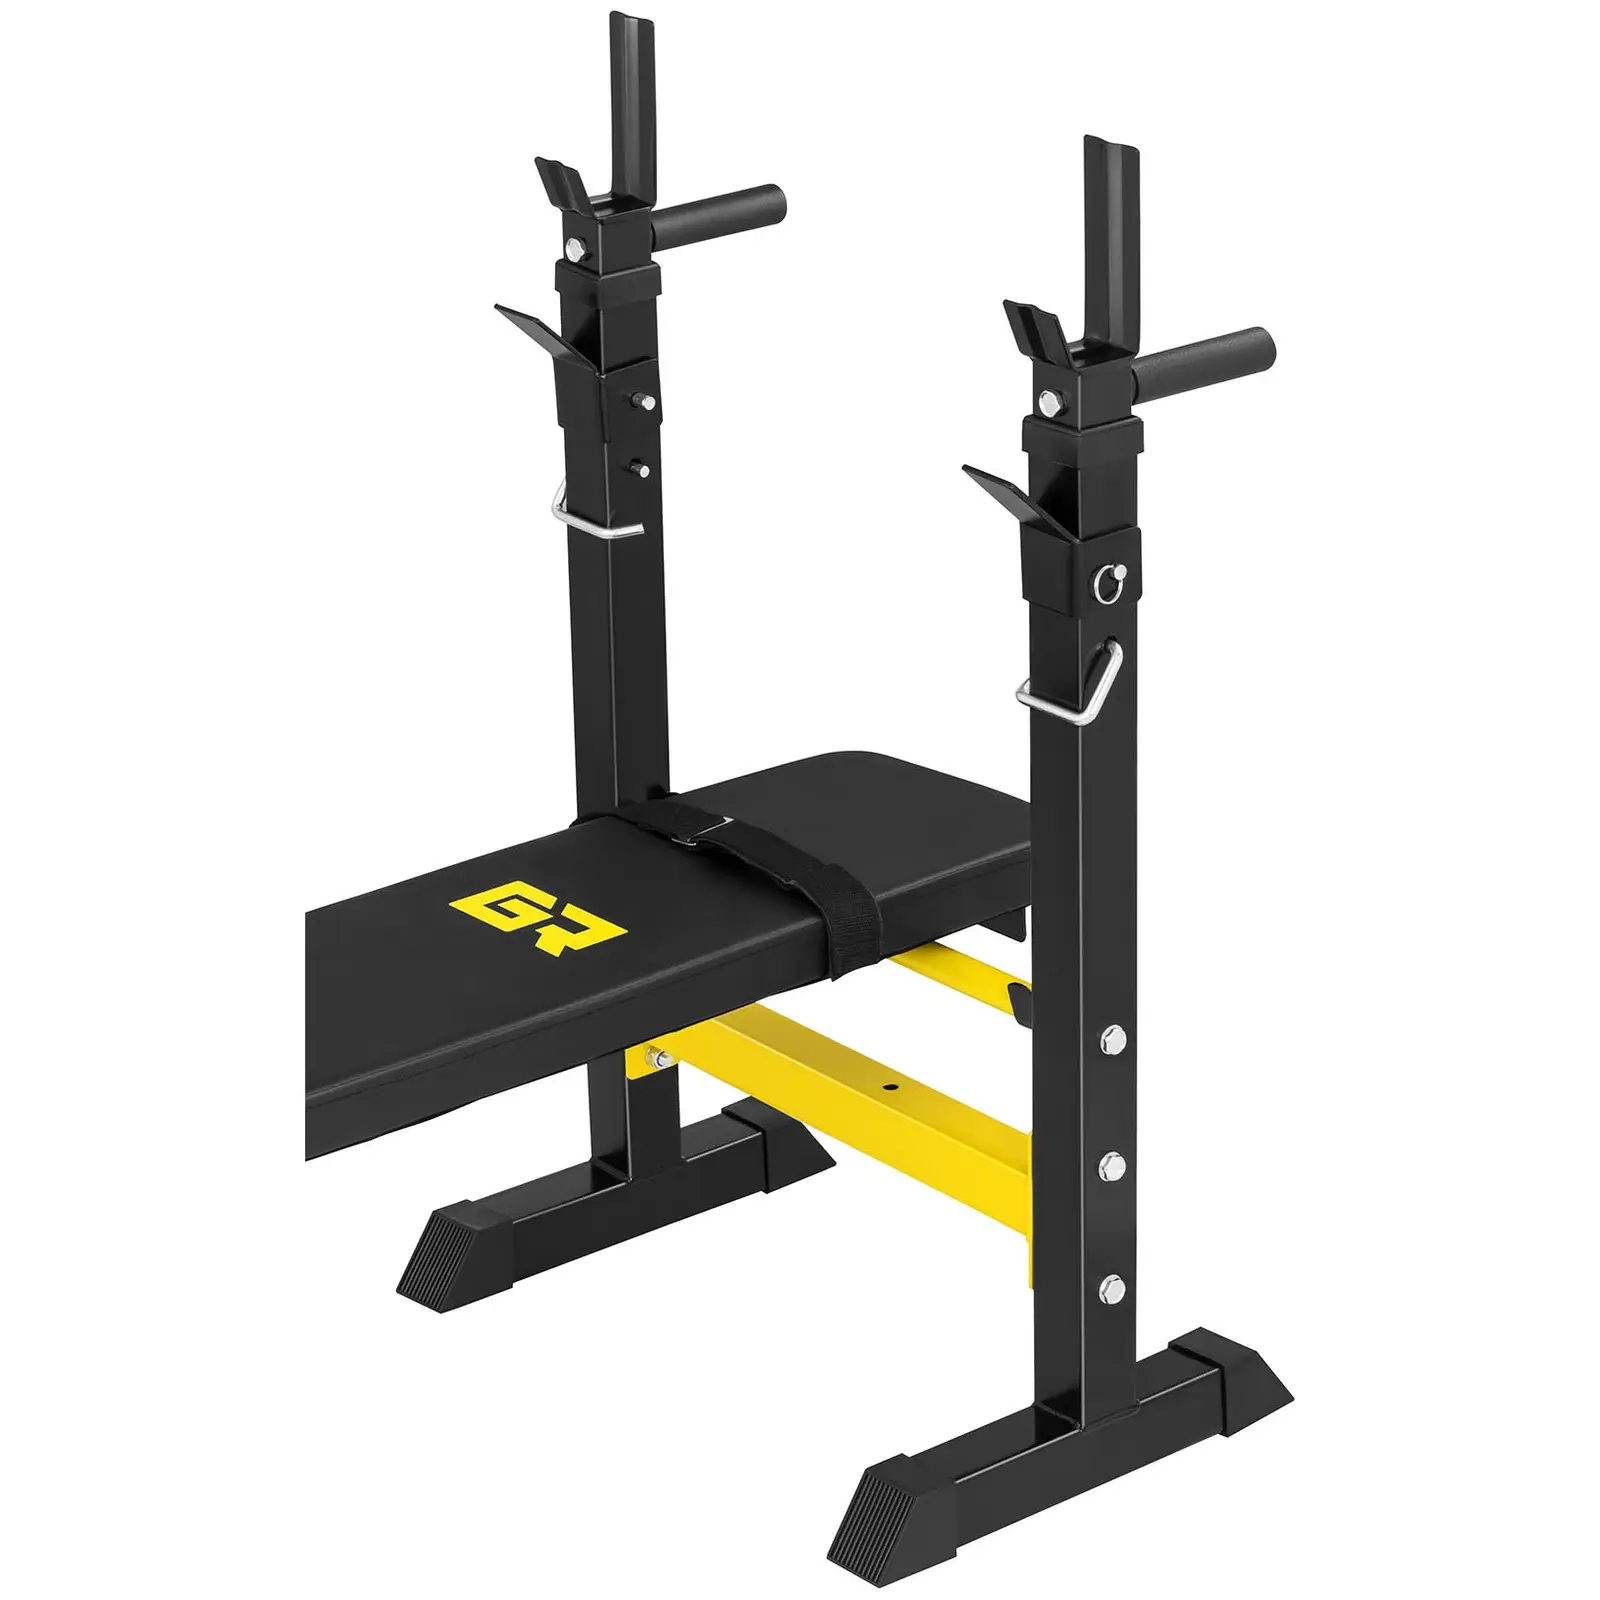 Bench Press - with rack and dip station